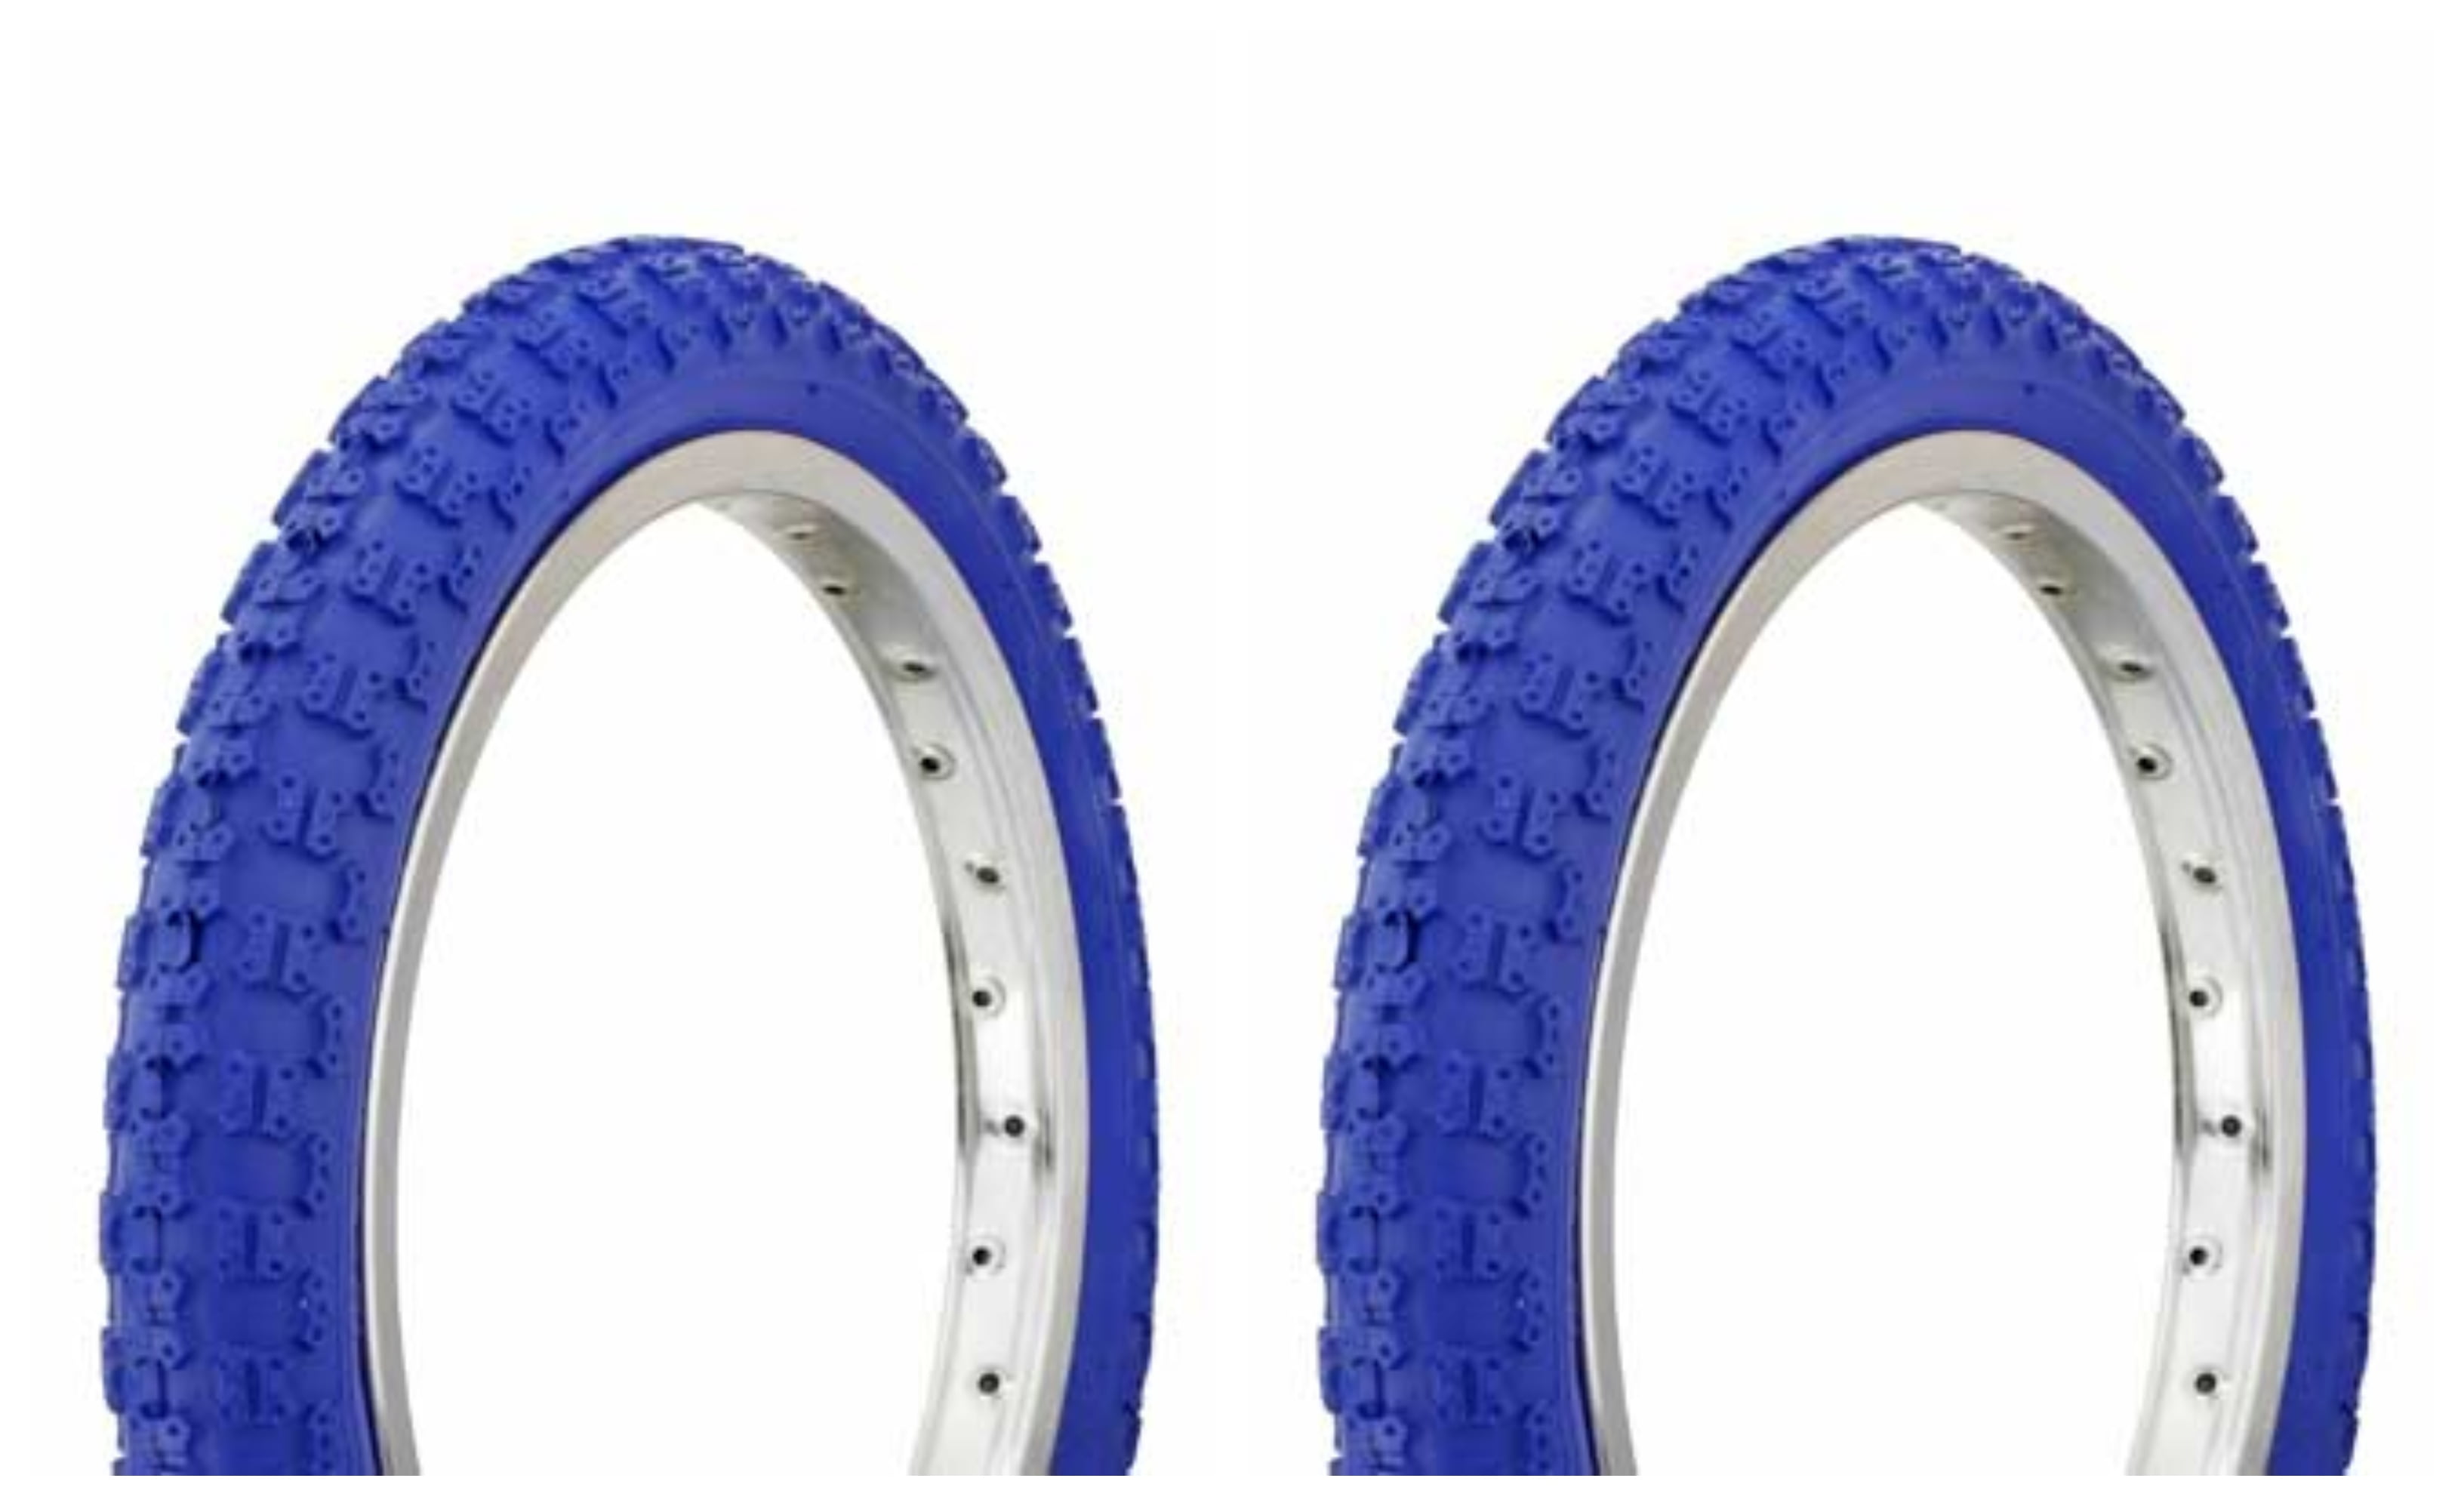 NEW BICYCLE DURO TIRE IN 16 X 2.125 BLUE/BLUE SIDE WALL IN COMP III STYLE! 